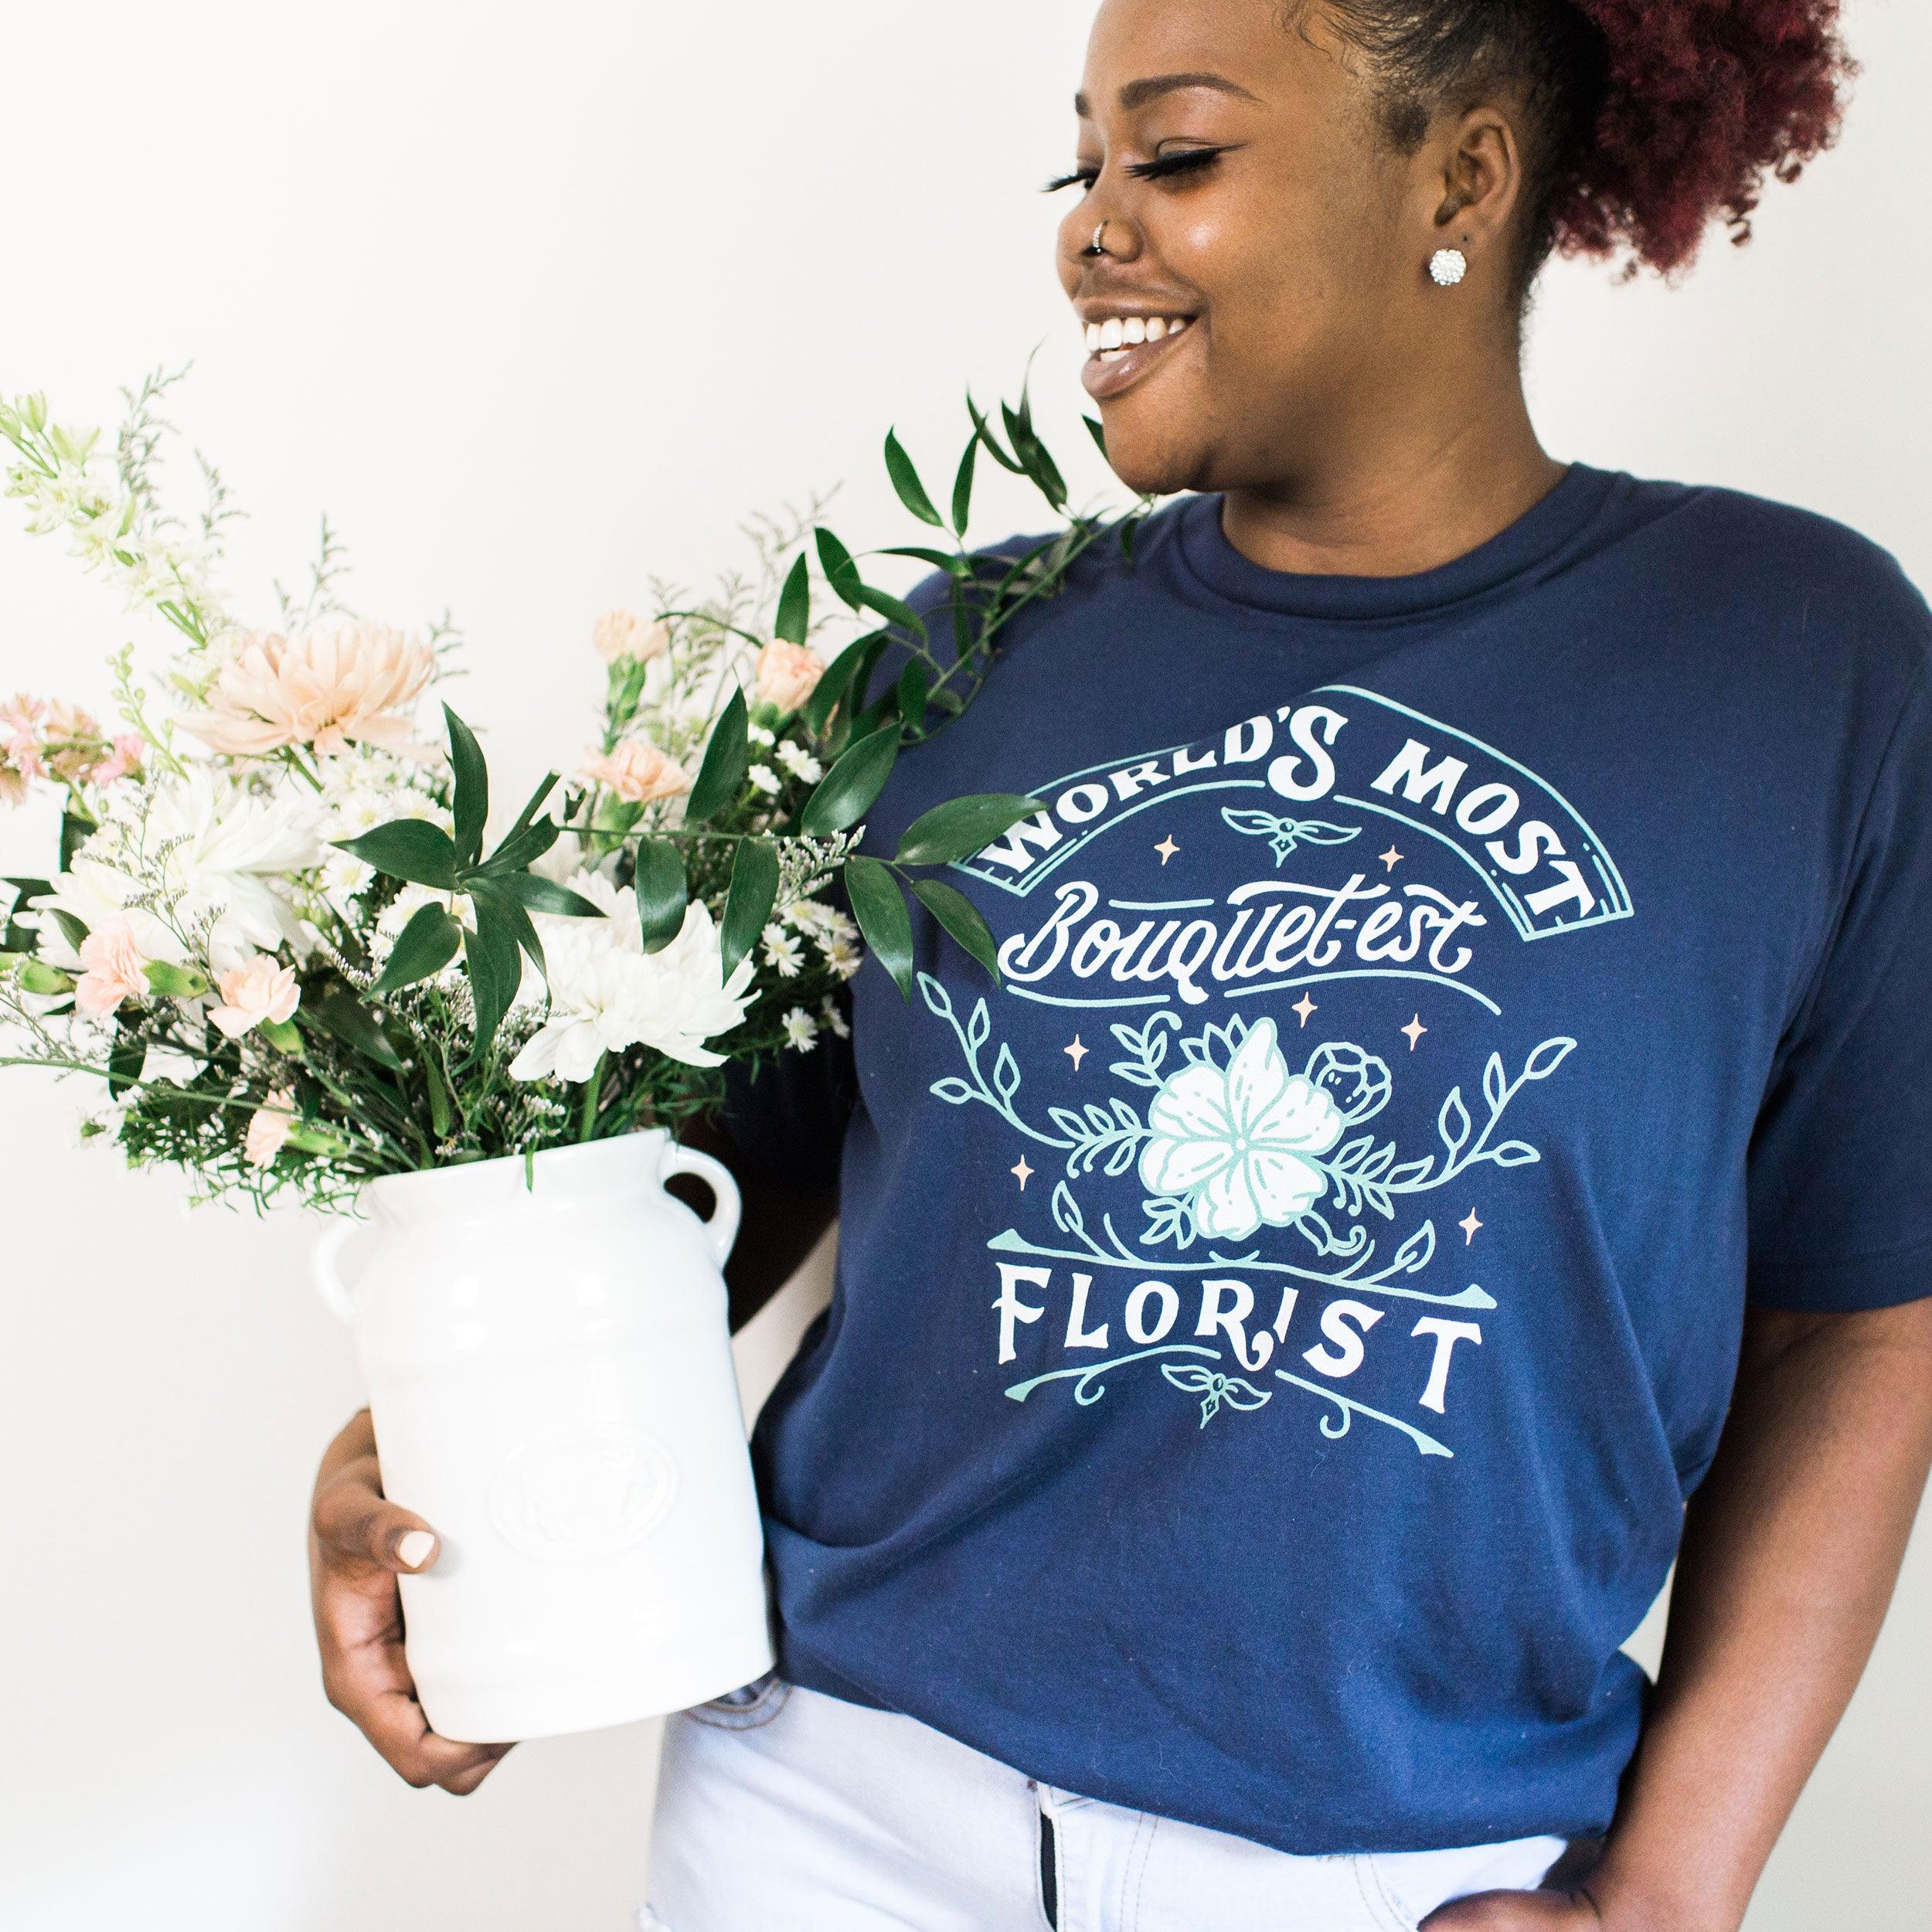 Florist Tees, Shirts, Swag and thank you gifts from Oaklynn Lane